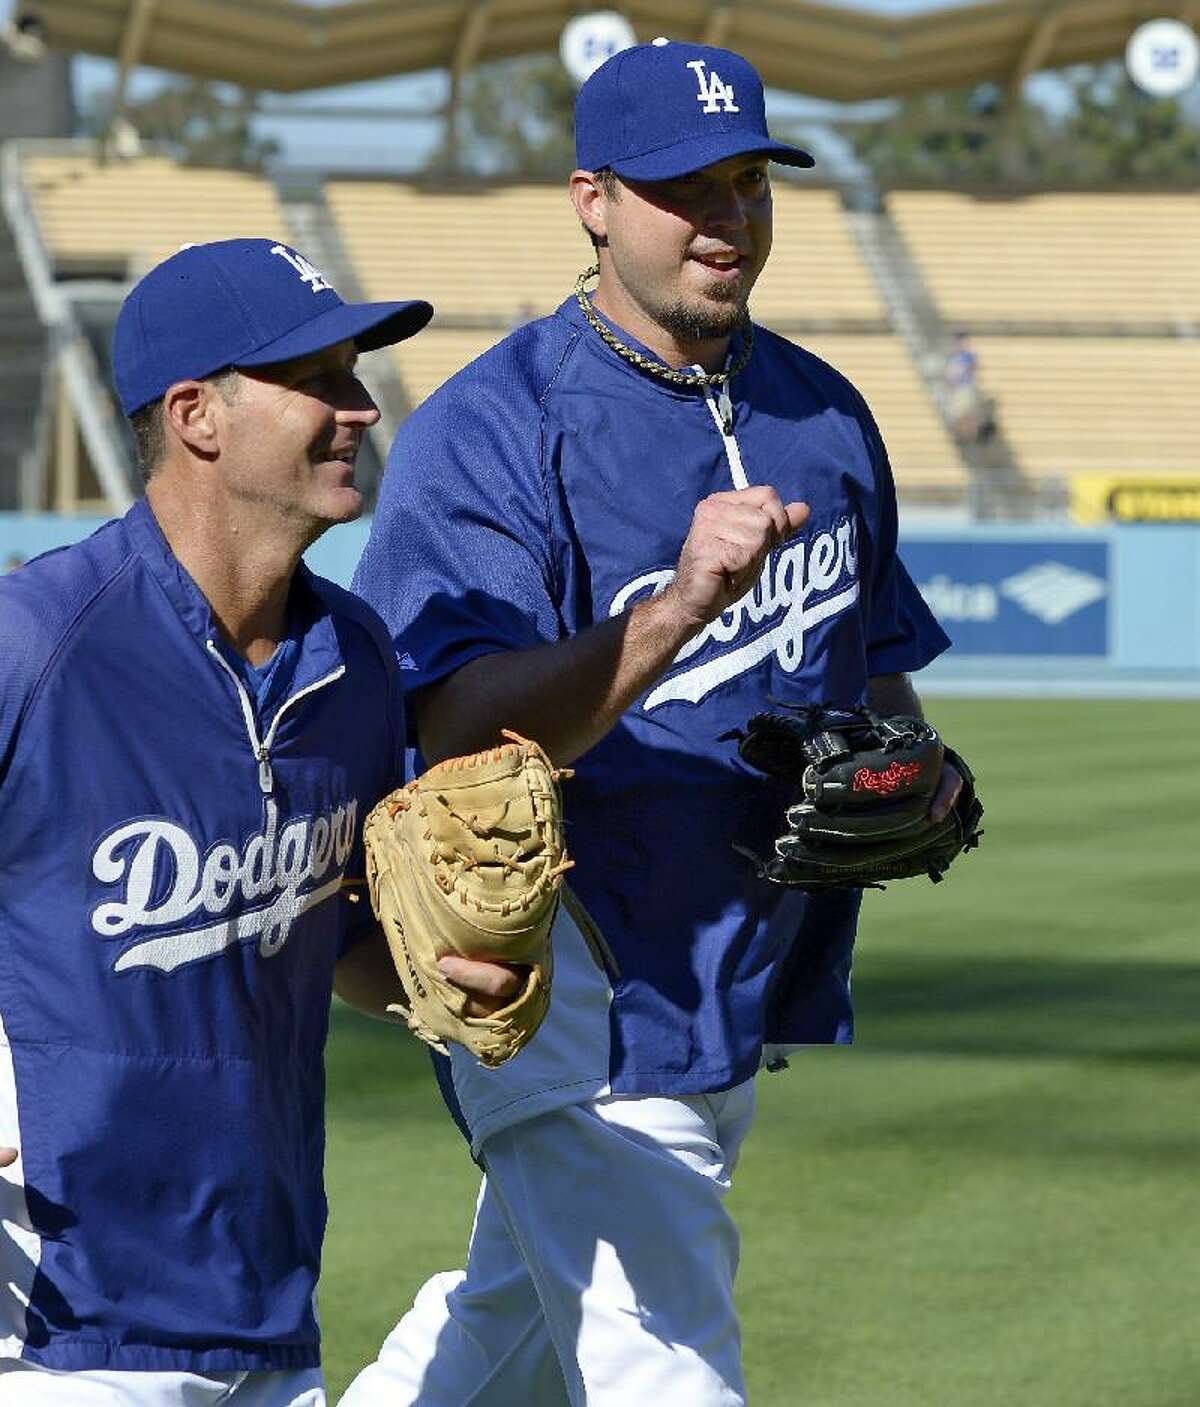 ASSOCIATED PRESS Newly acquired Los Angeles Dodgers pitcher Josh Beckett, right, gestures as he runs off the field with pitching coach Rick Honeycutt prior to the Dodgers' game against the Miami Marlins on Saturday night at Dodger Stadium in Los Angeles.